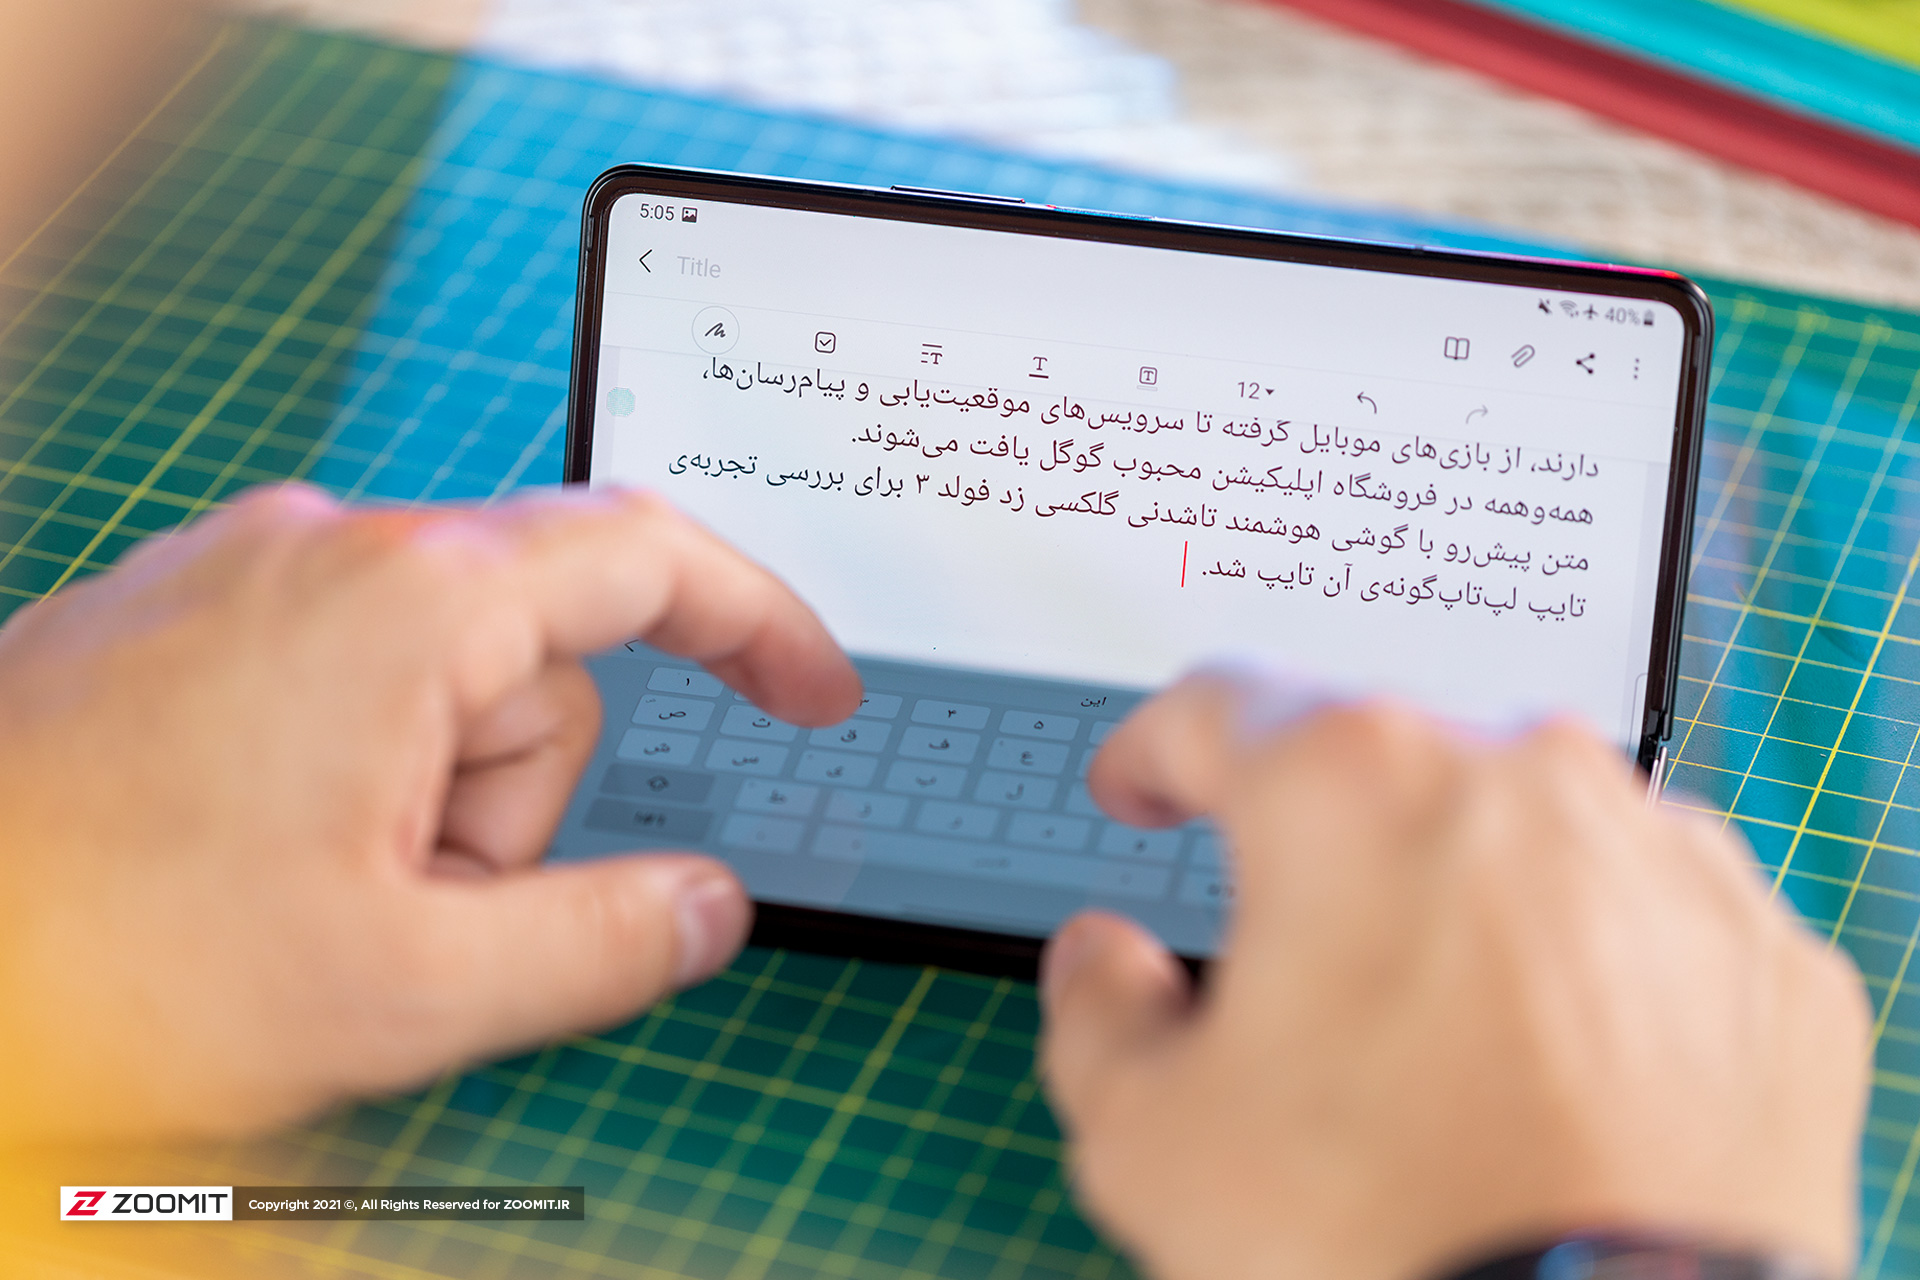 Laptop-like typing experience on Galaxy Z Fold 3